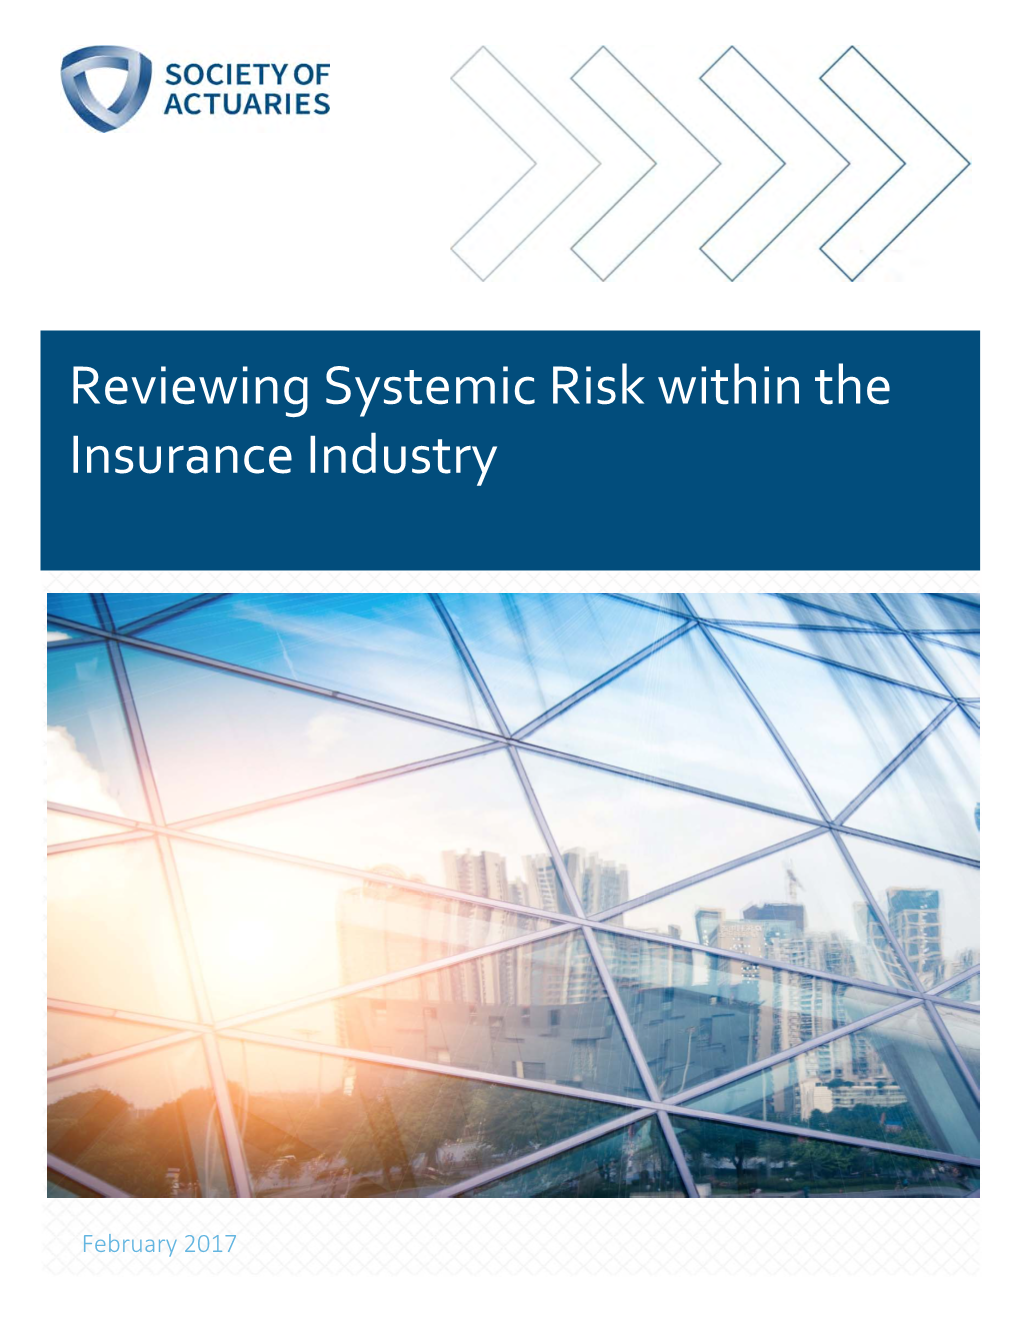 Reviewing Systemic Risk Within the Insurance Industry